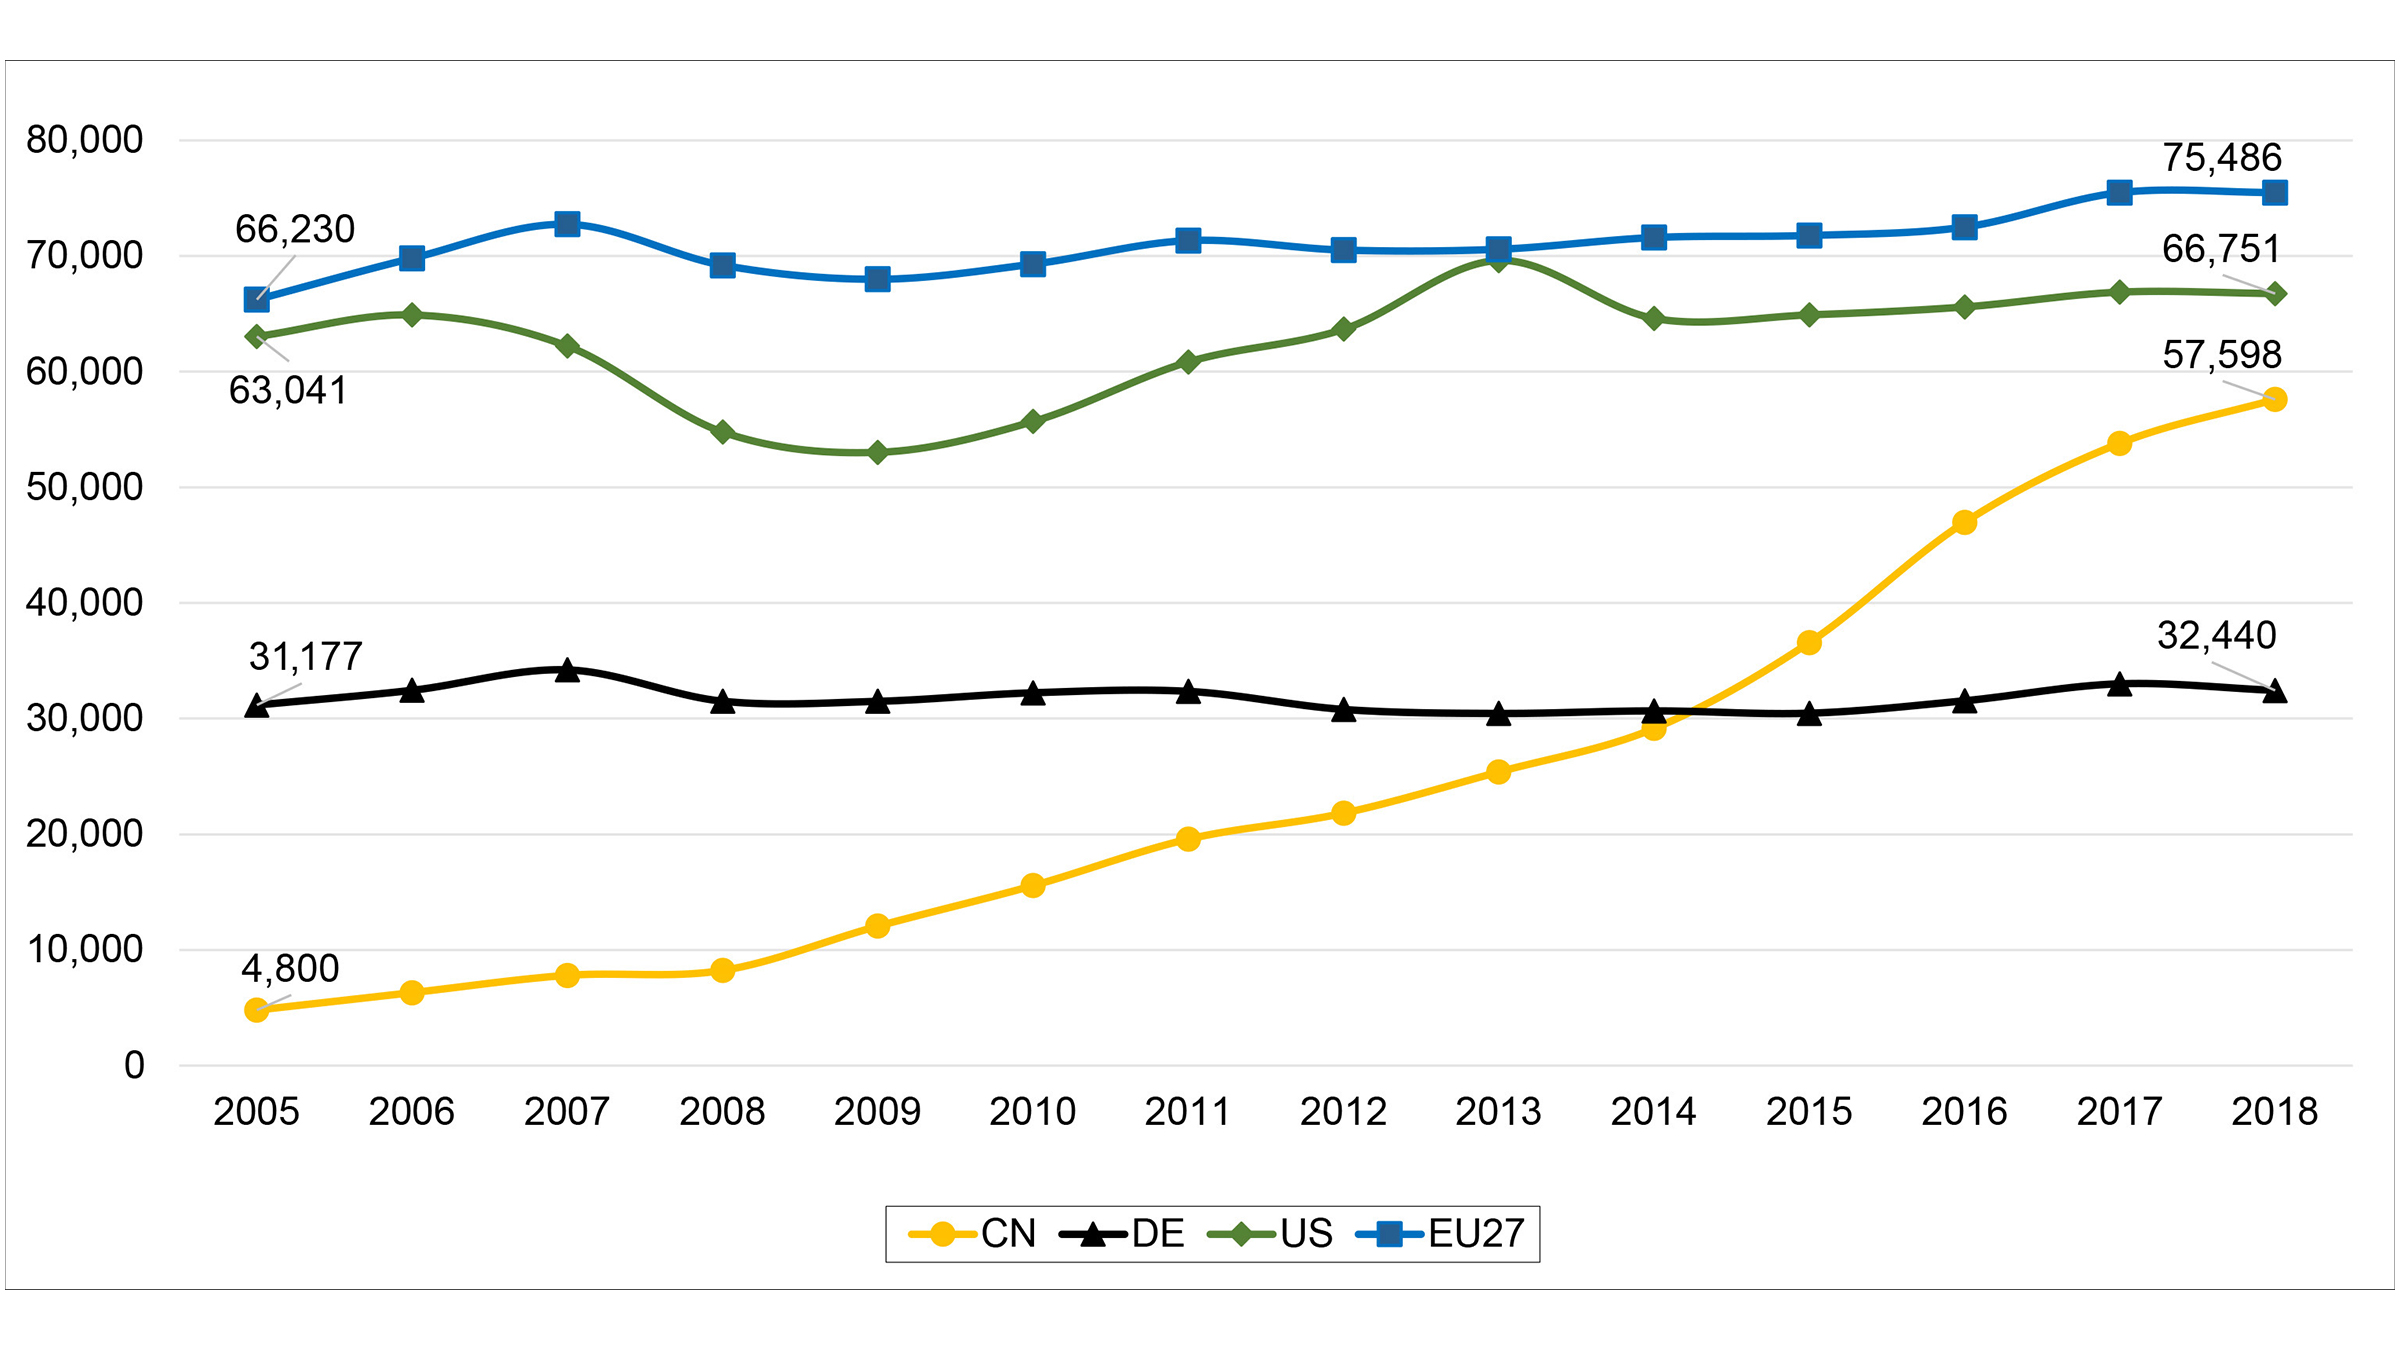 Graphic of Development of Transnational Patent Applications, 2005–2018